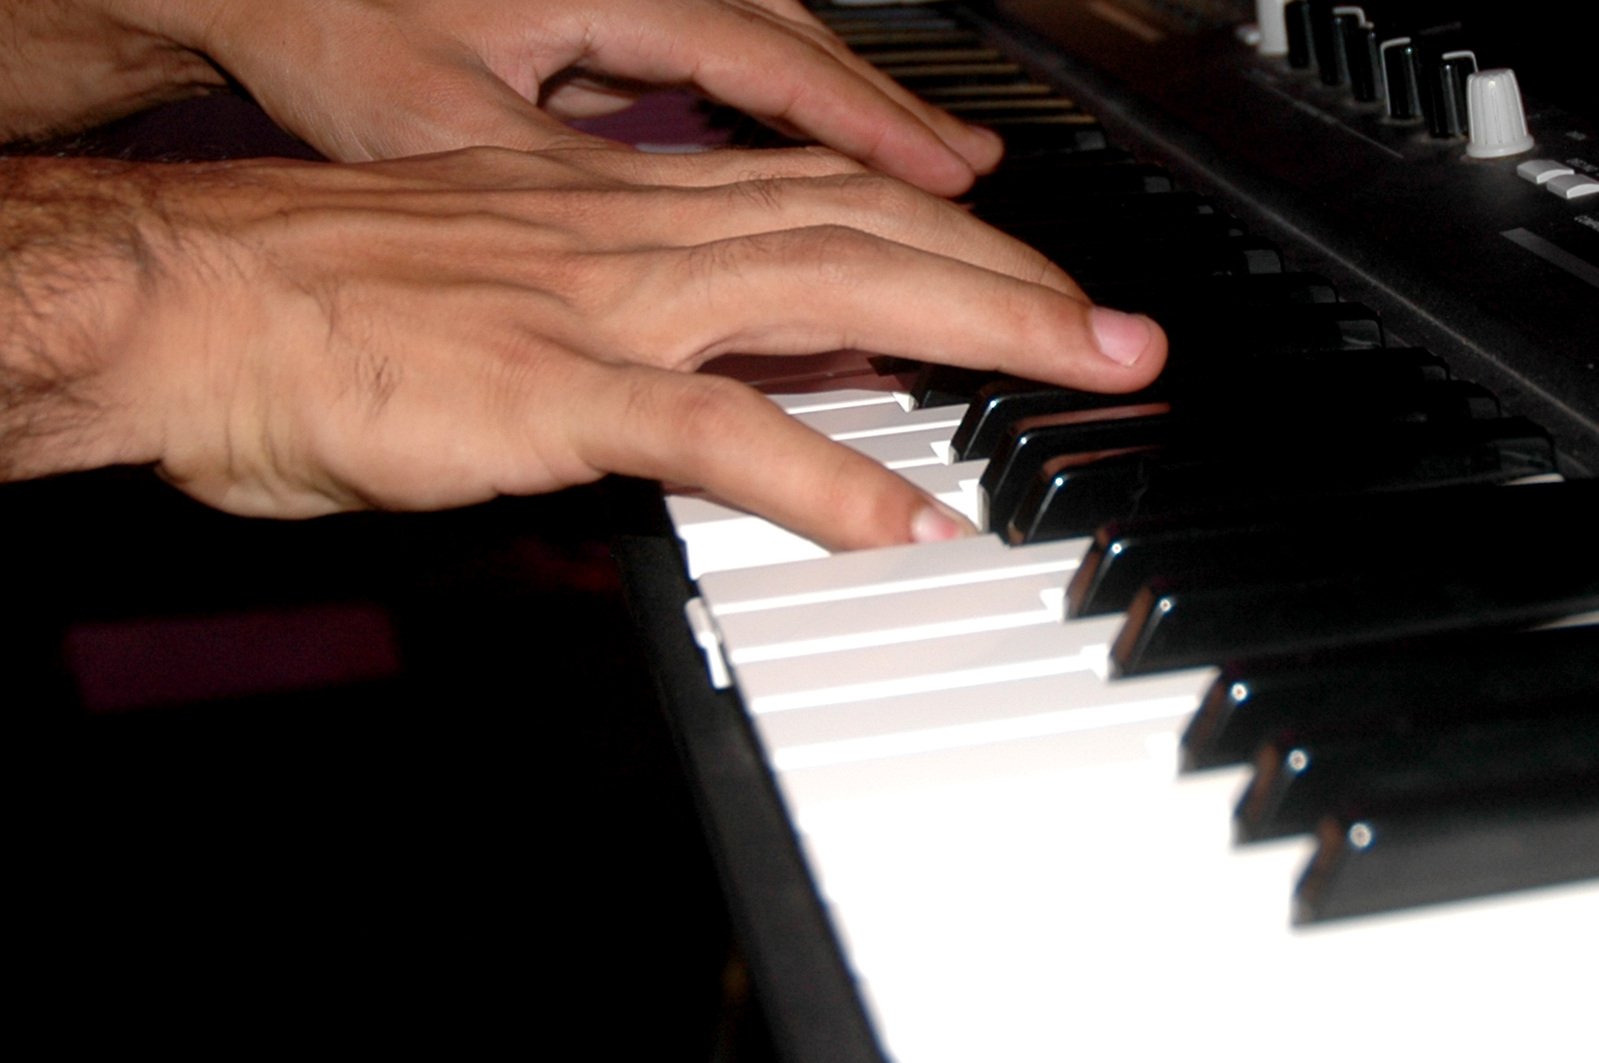 one hand plays the piano while another hand rests on it